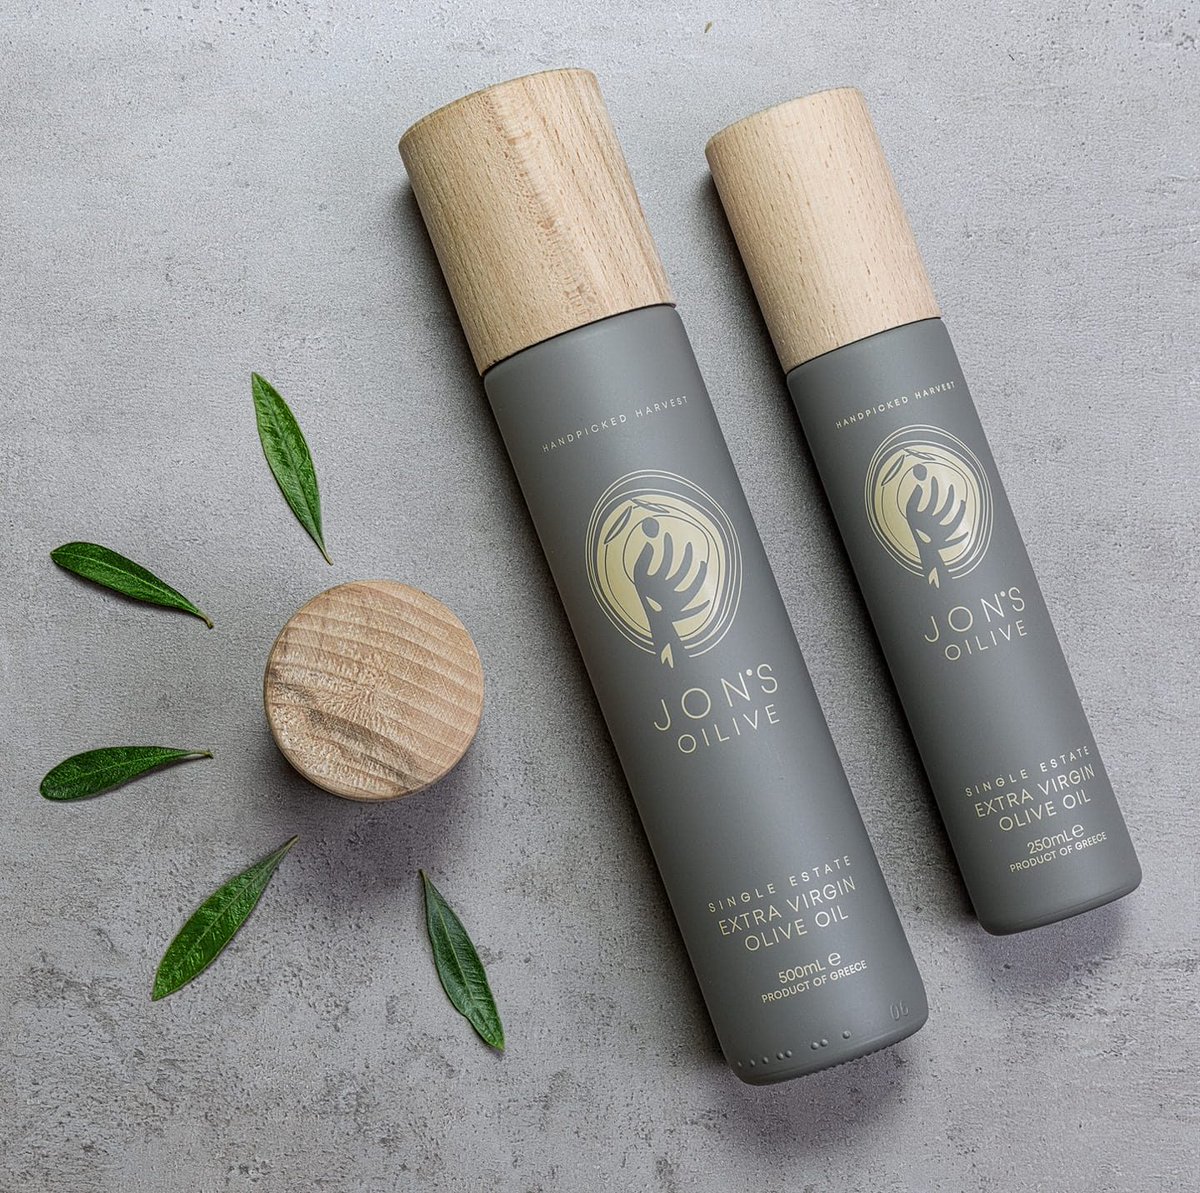 Experience the awe-inspiring aesthetic of our premium #EVOO, crafted from olives harvested from the wooden groves of Greek heritage by jonsoilive

#extravirginoliveoil #greece #stefanandsons #madeingreece #evoo #freeshipping #offer